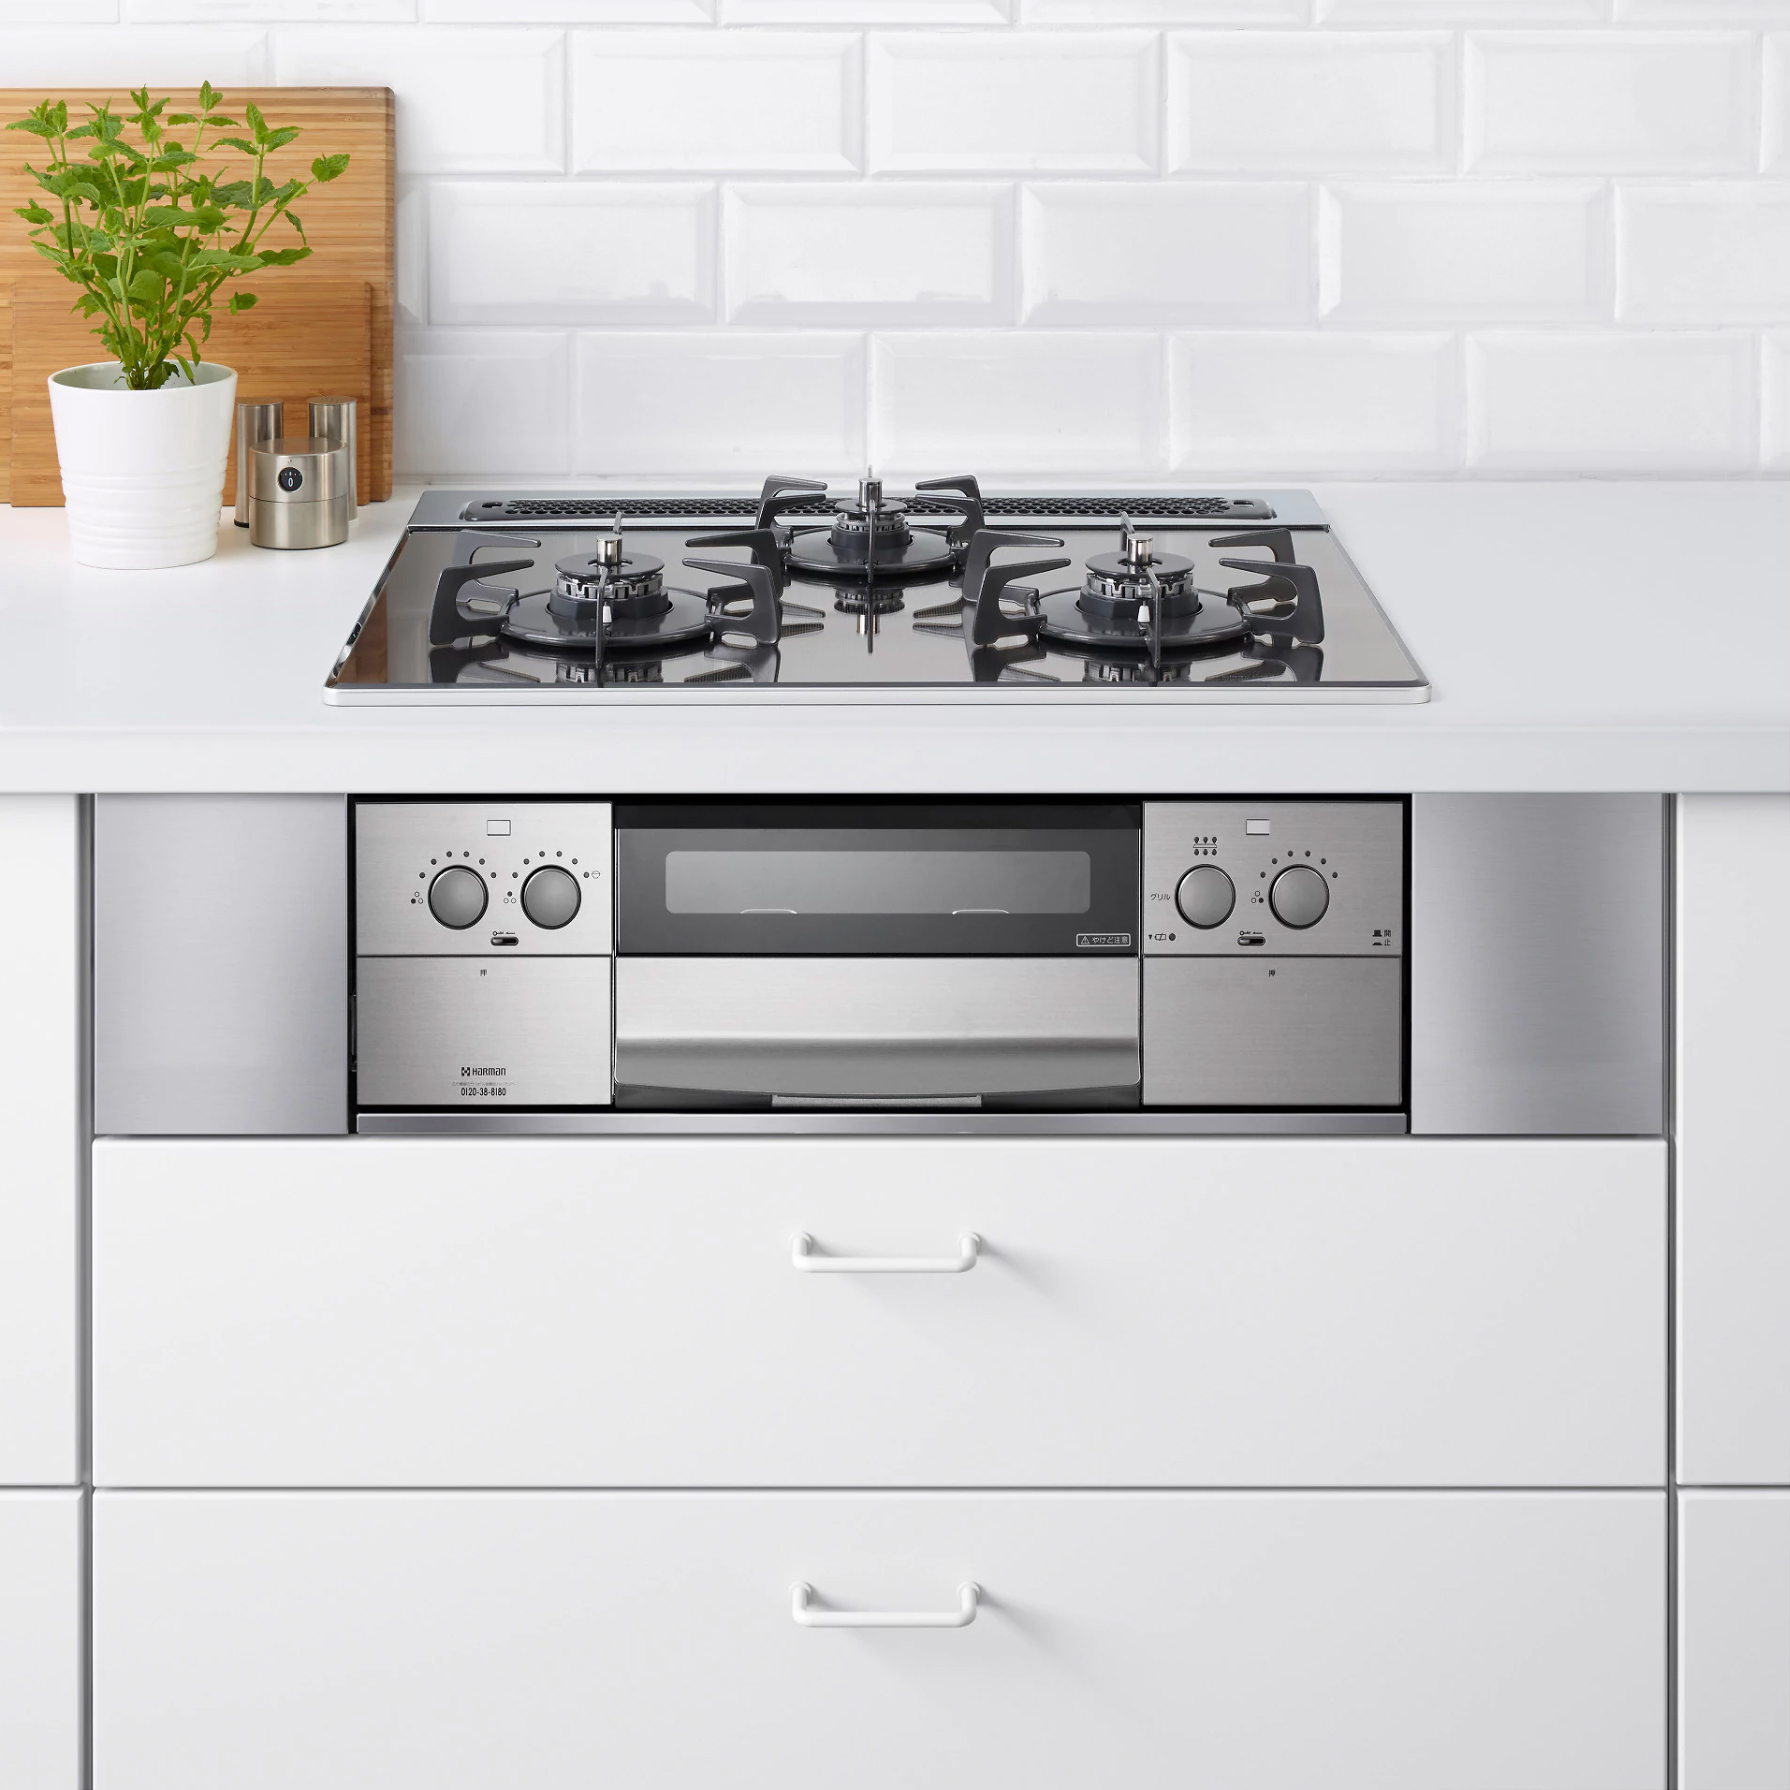 Customize an IKEA cabinet for a front-controlled gas cooktop